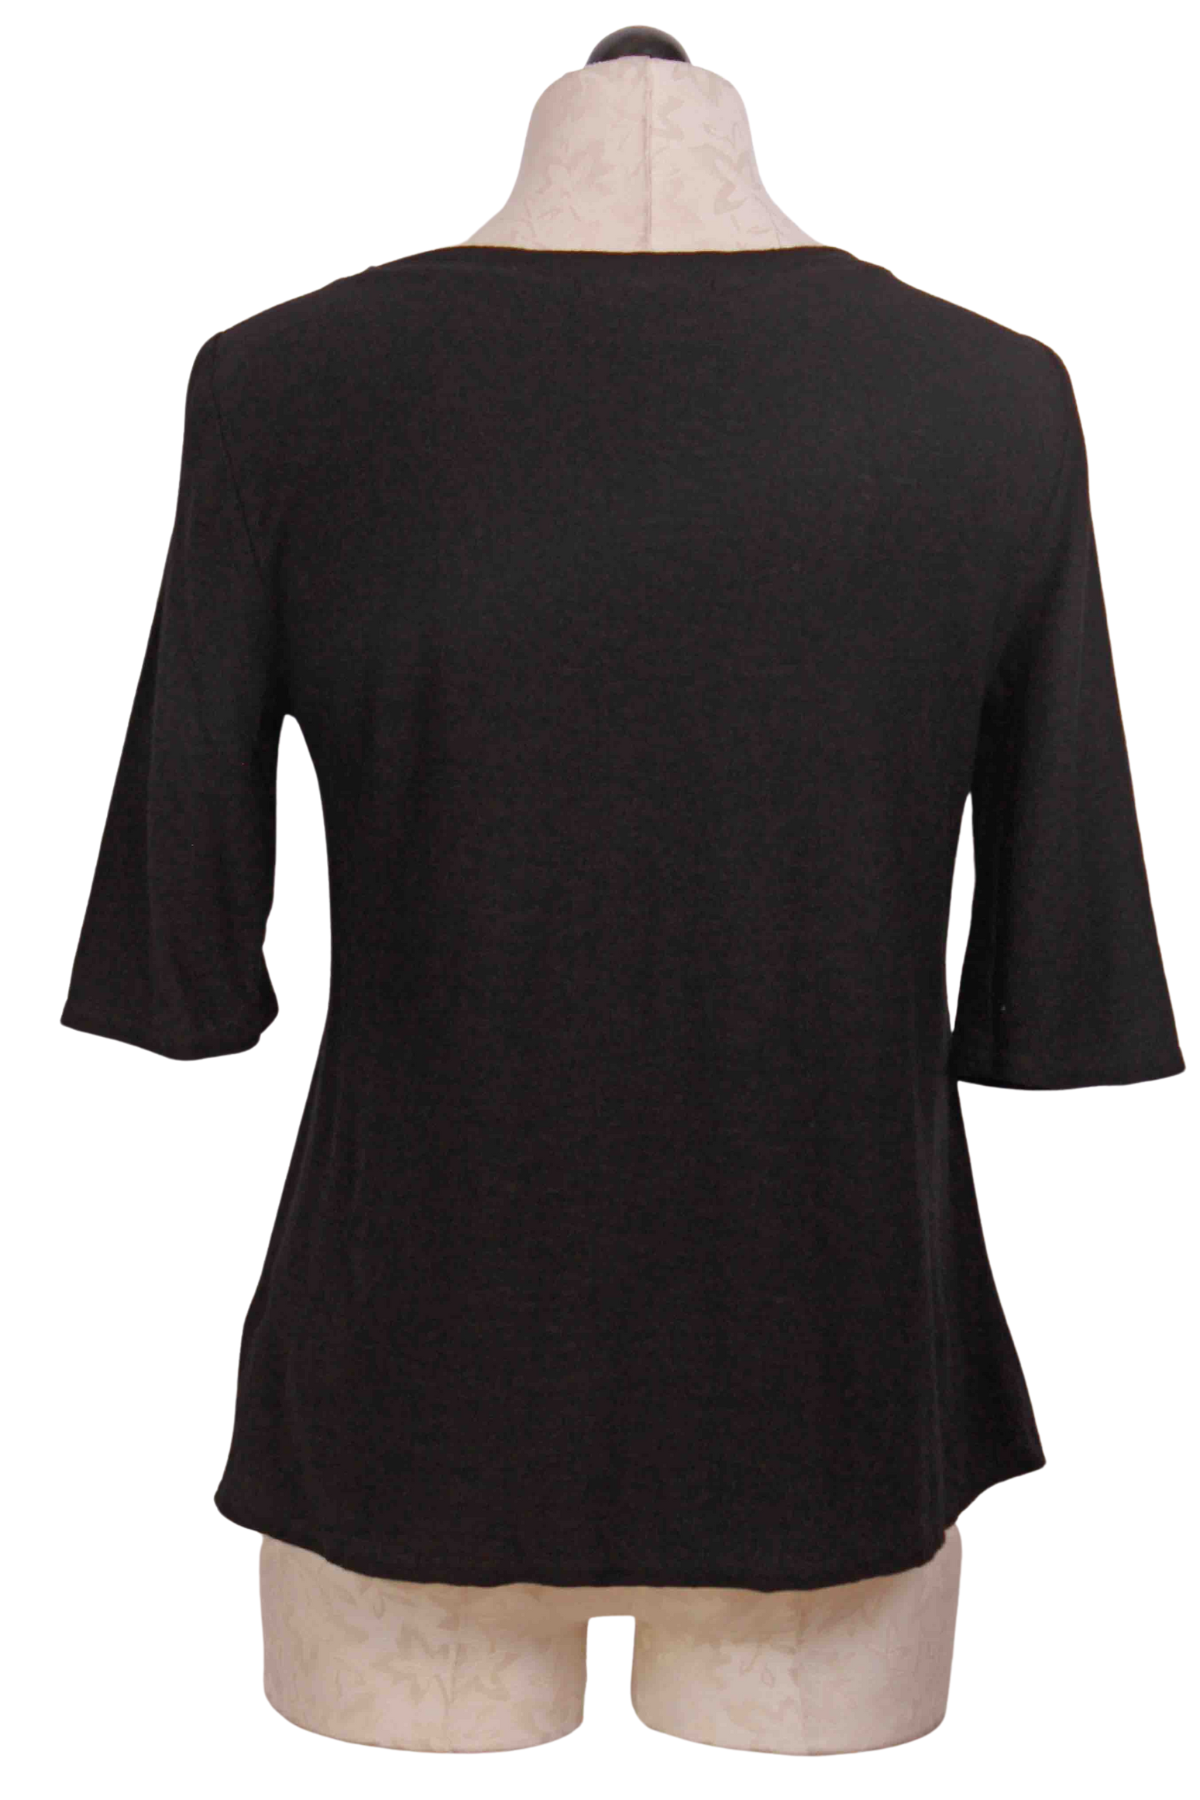 back view of Black Elbow Tee by Cut Loose